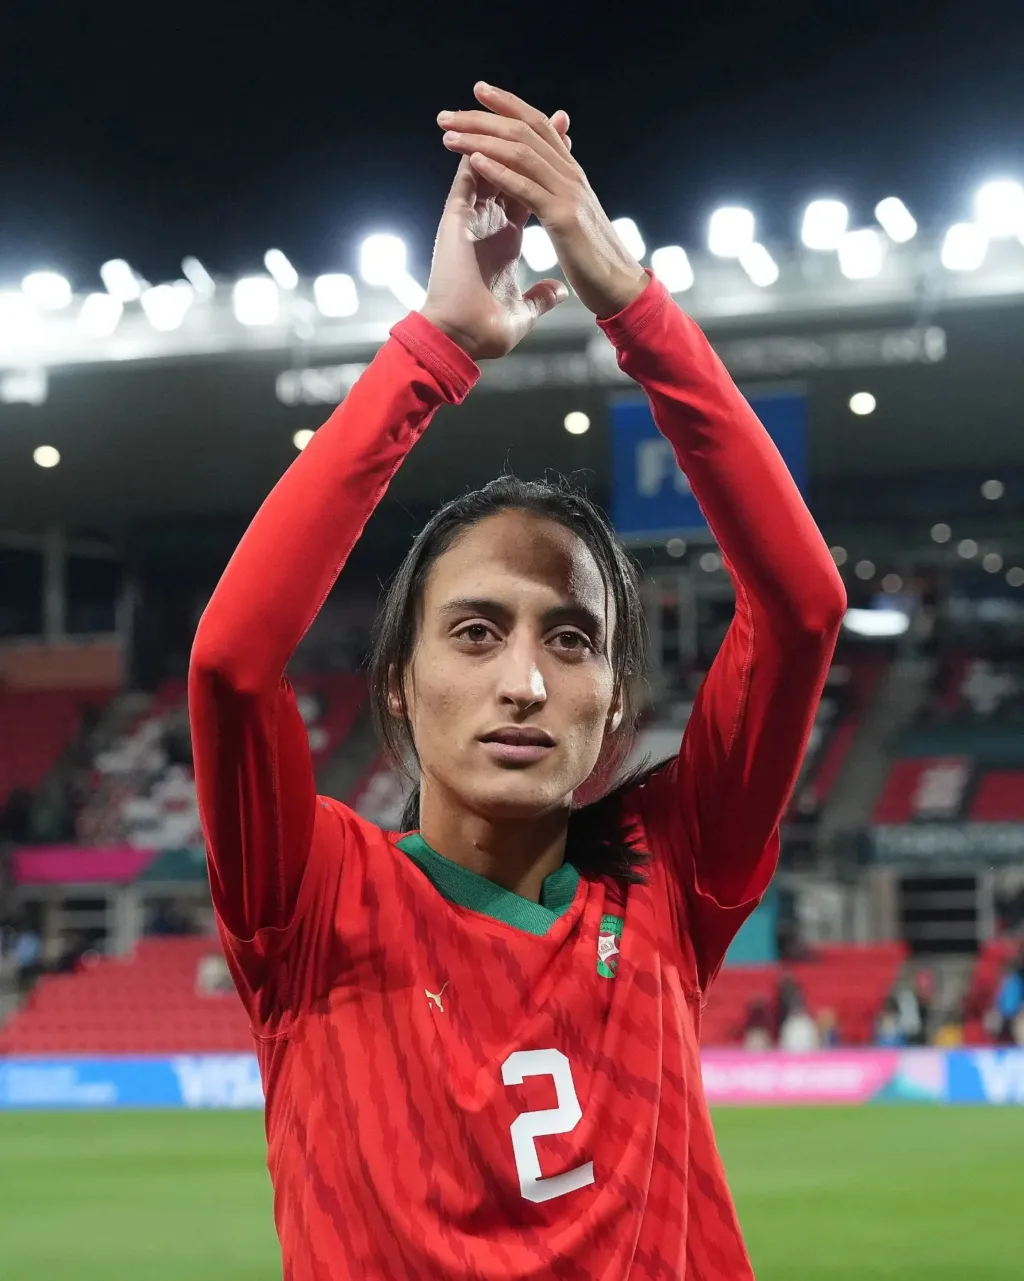 Morocco's Z. Redouani appreciates the support of fans after 4-0 loss to France/Instagram @fifawomensworldcup